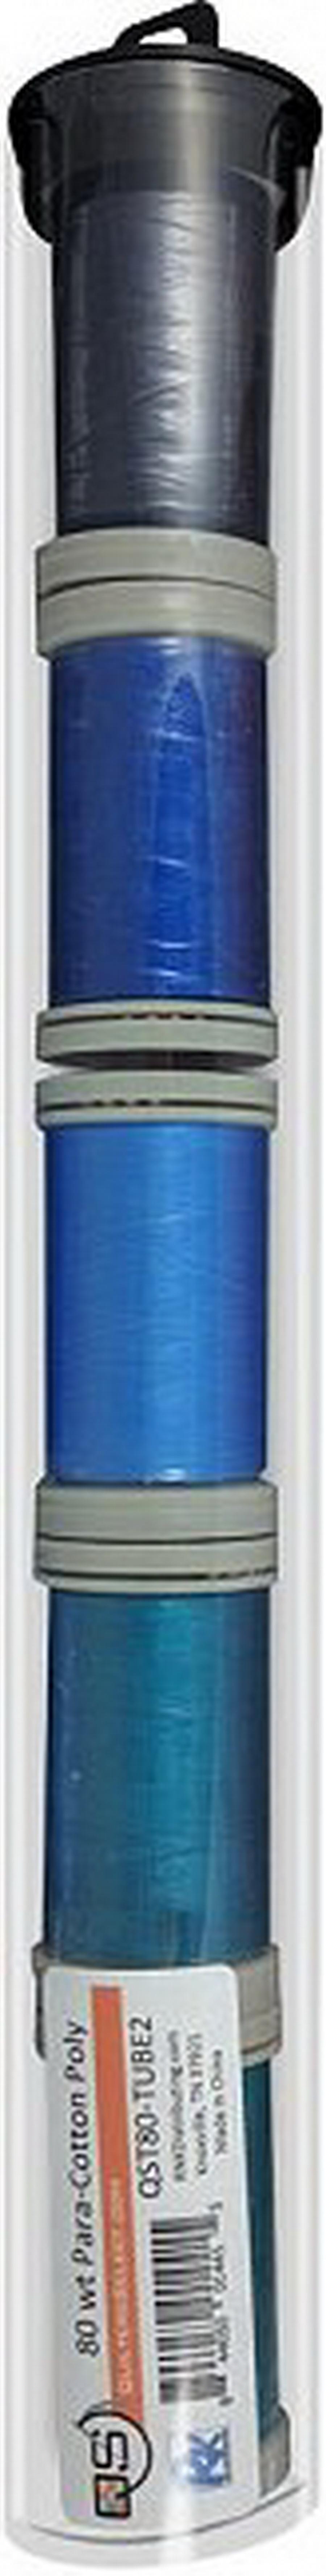 Quilters Select Para-Cotton Polyester Thread 80 Weight Tube Bundle 2